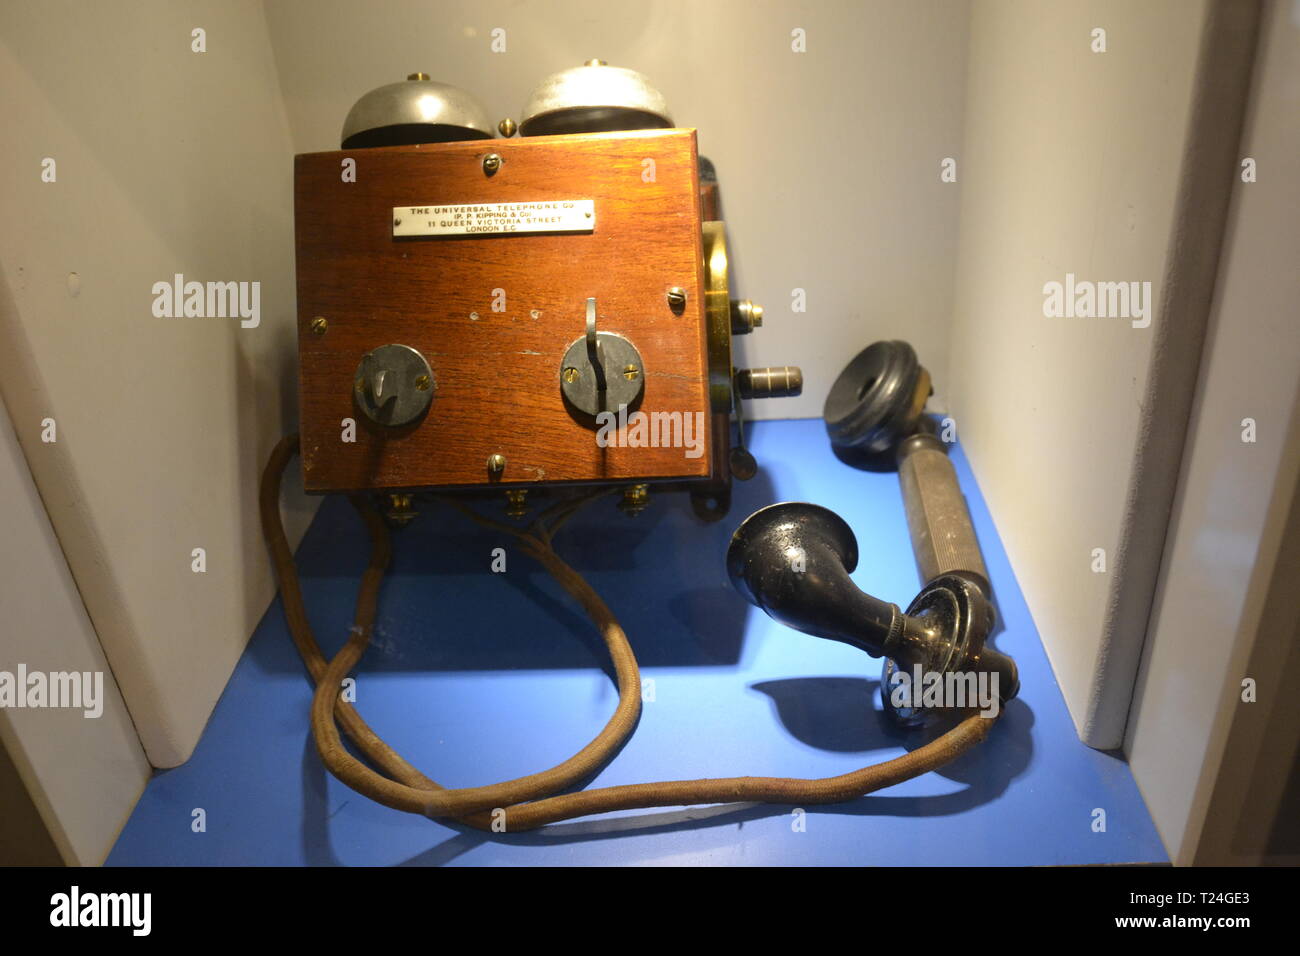 Old fashioned telephone by Ericsson of Sweden, date 1880 in the Connected Earth Exhibition at the Milton Keynes Museum, Wolverton, Buckinghamshire, UK Stock Photo